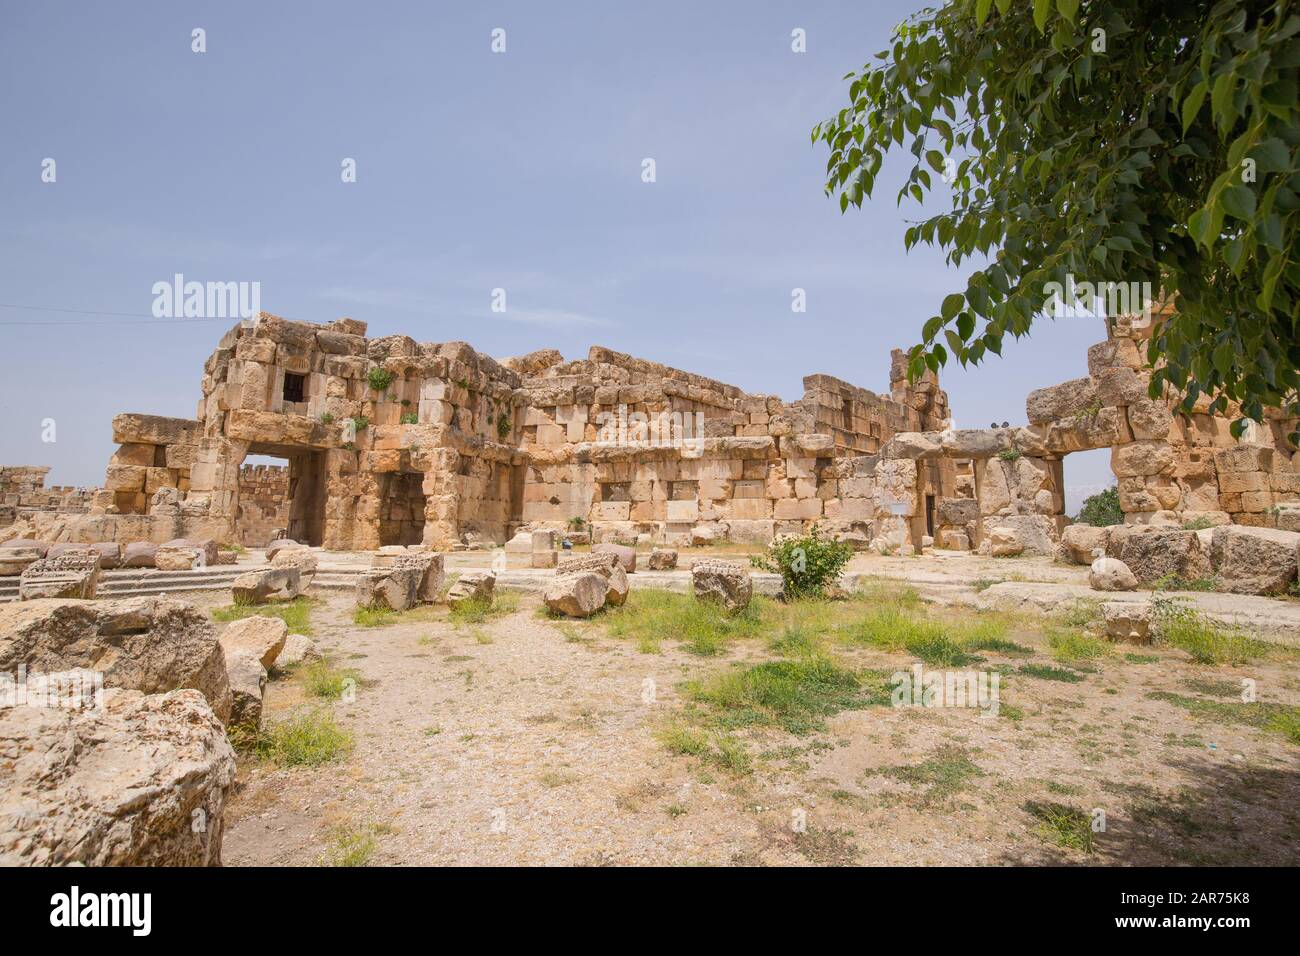 The Hexagonal Court. The ruins of the Roman city of Heliopolis or Baalbek in the Beqaa Valley. Baalbek, Lebanon - June, 2019 Stock Photo